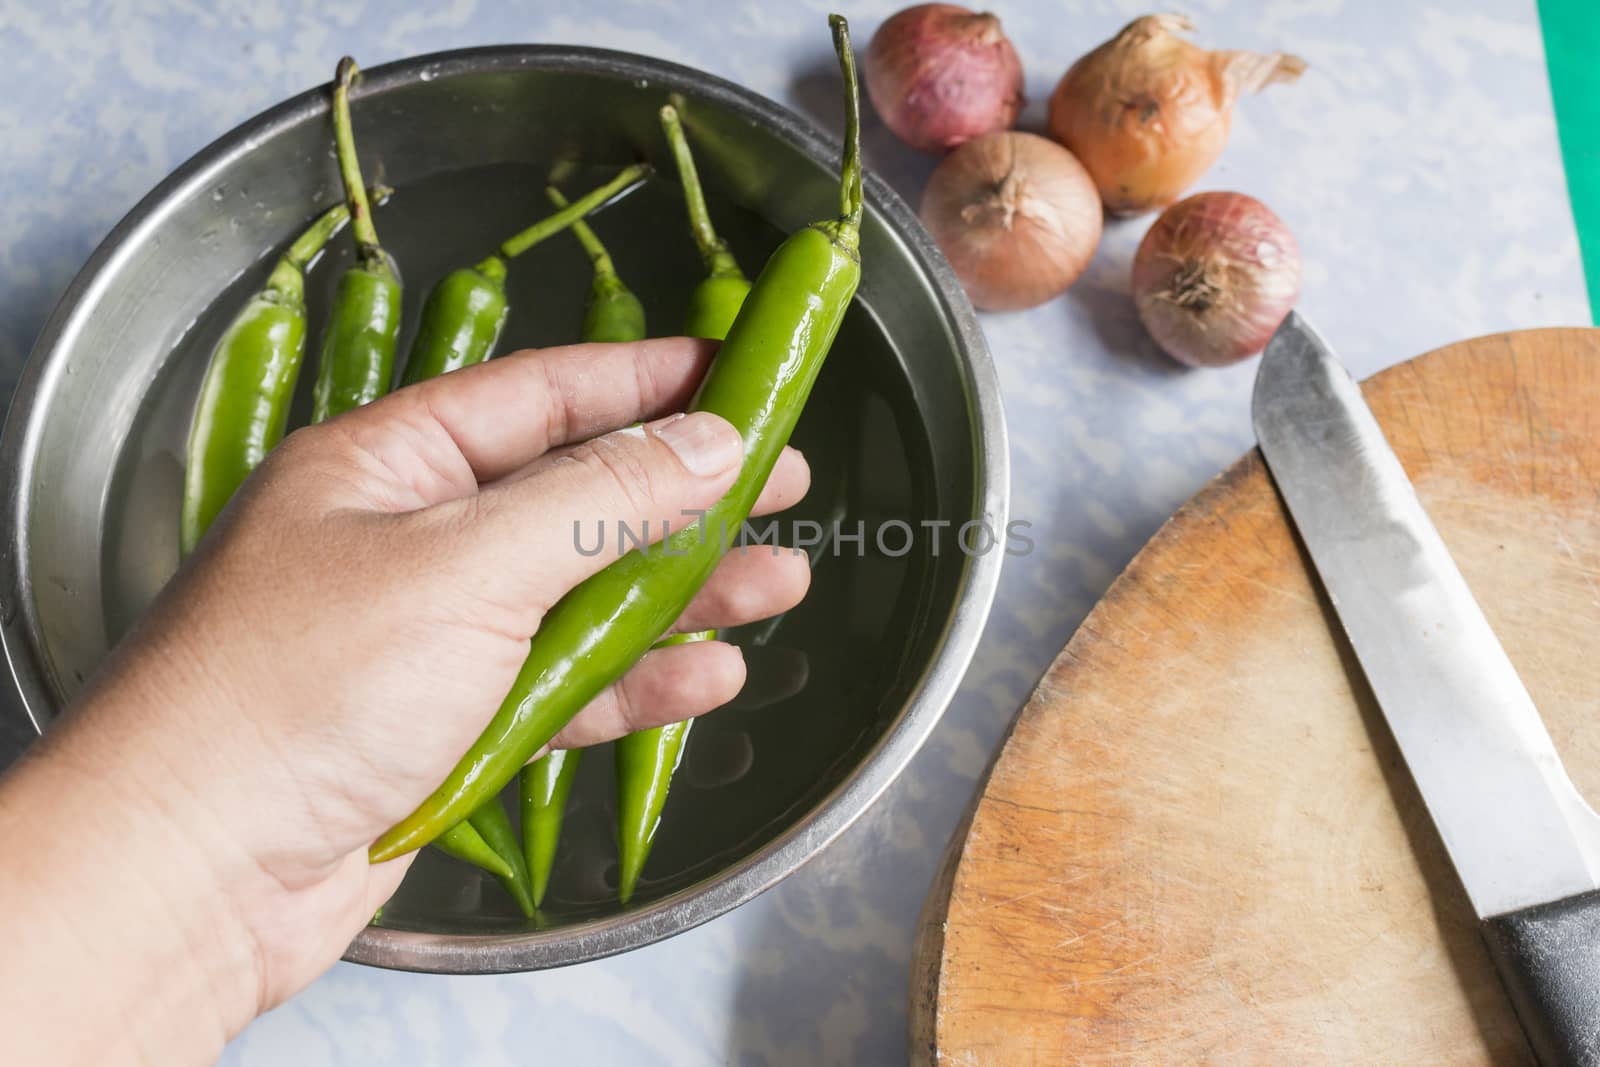 Chef hand holding green chilli pepper for cutting in kitchen,food concept